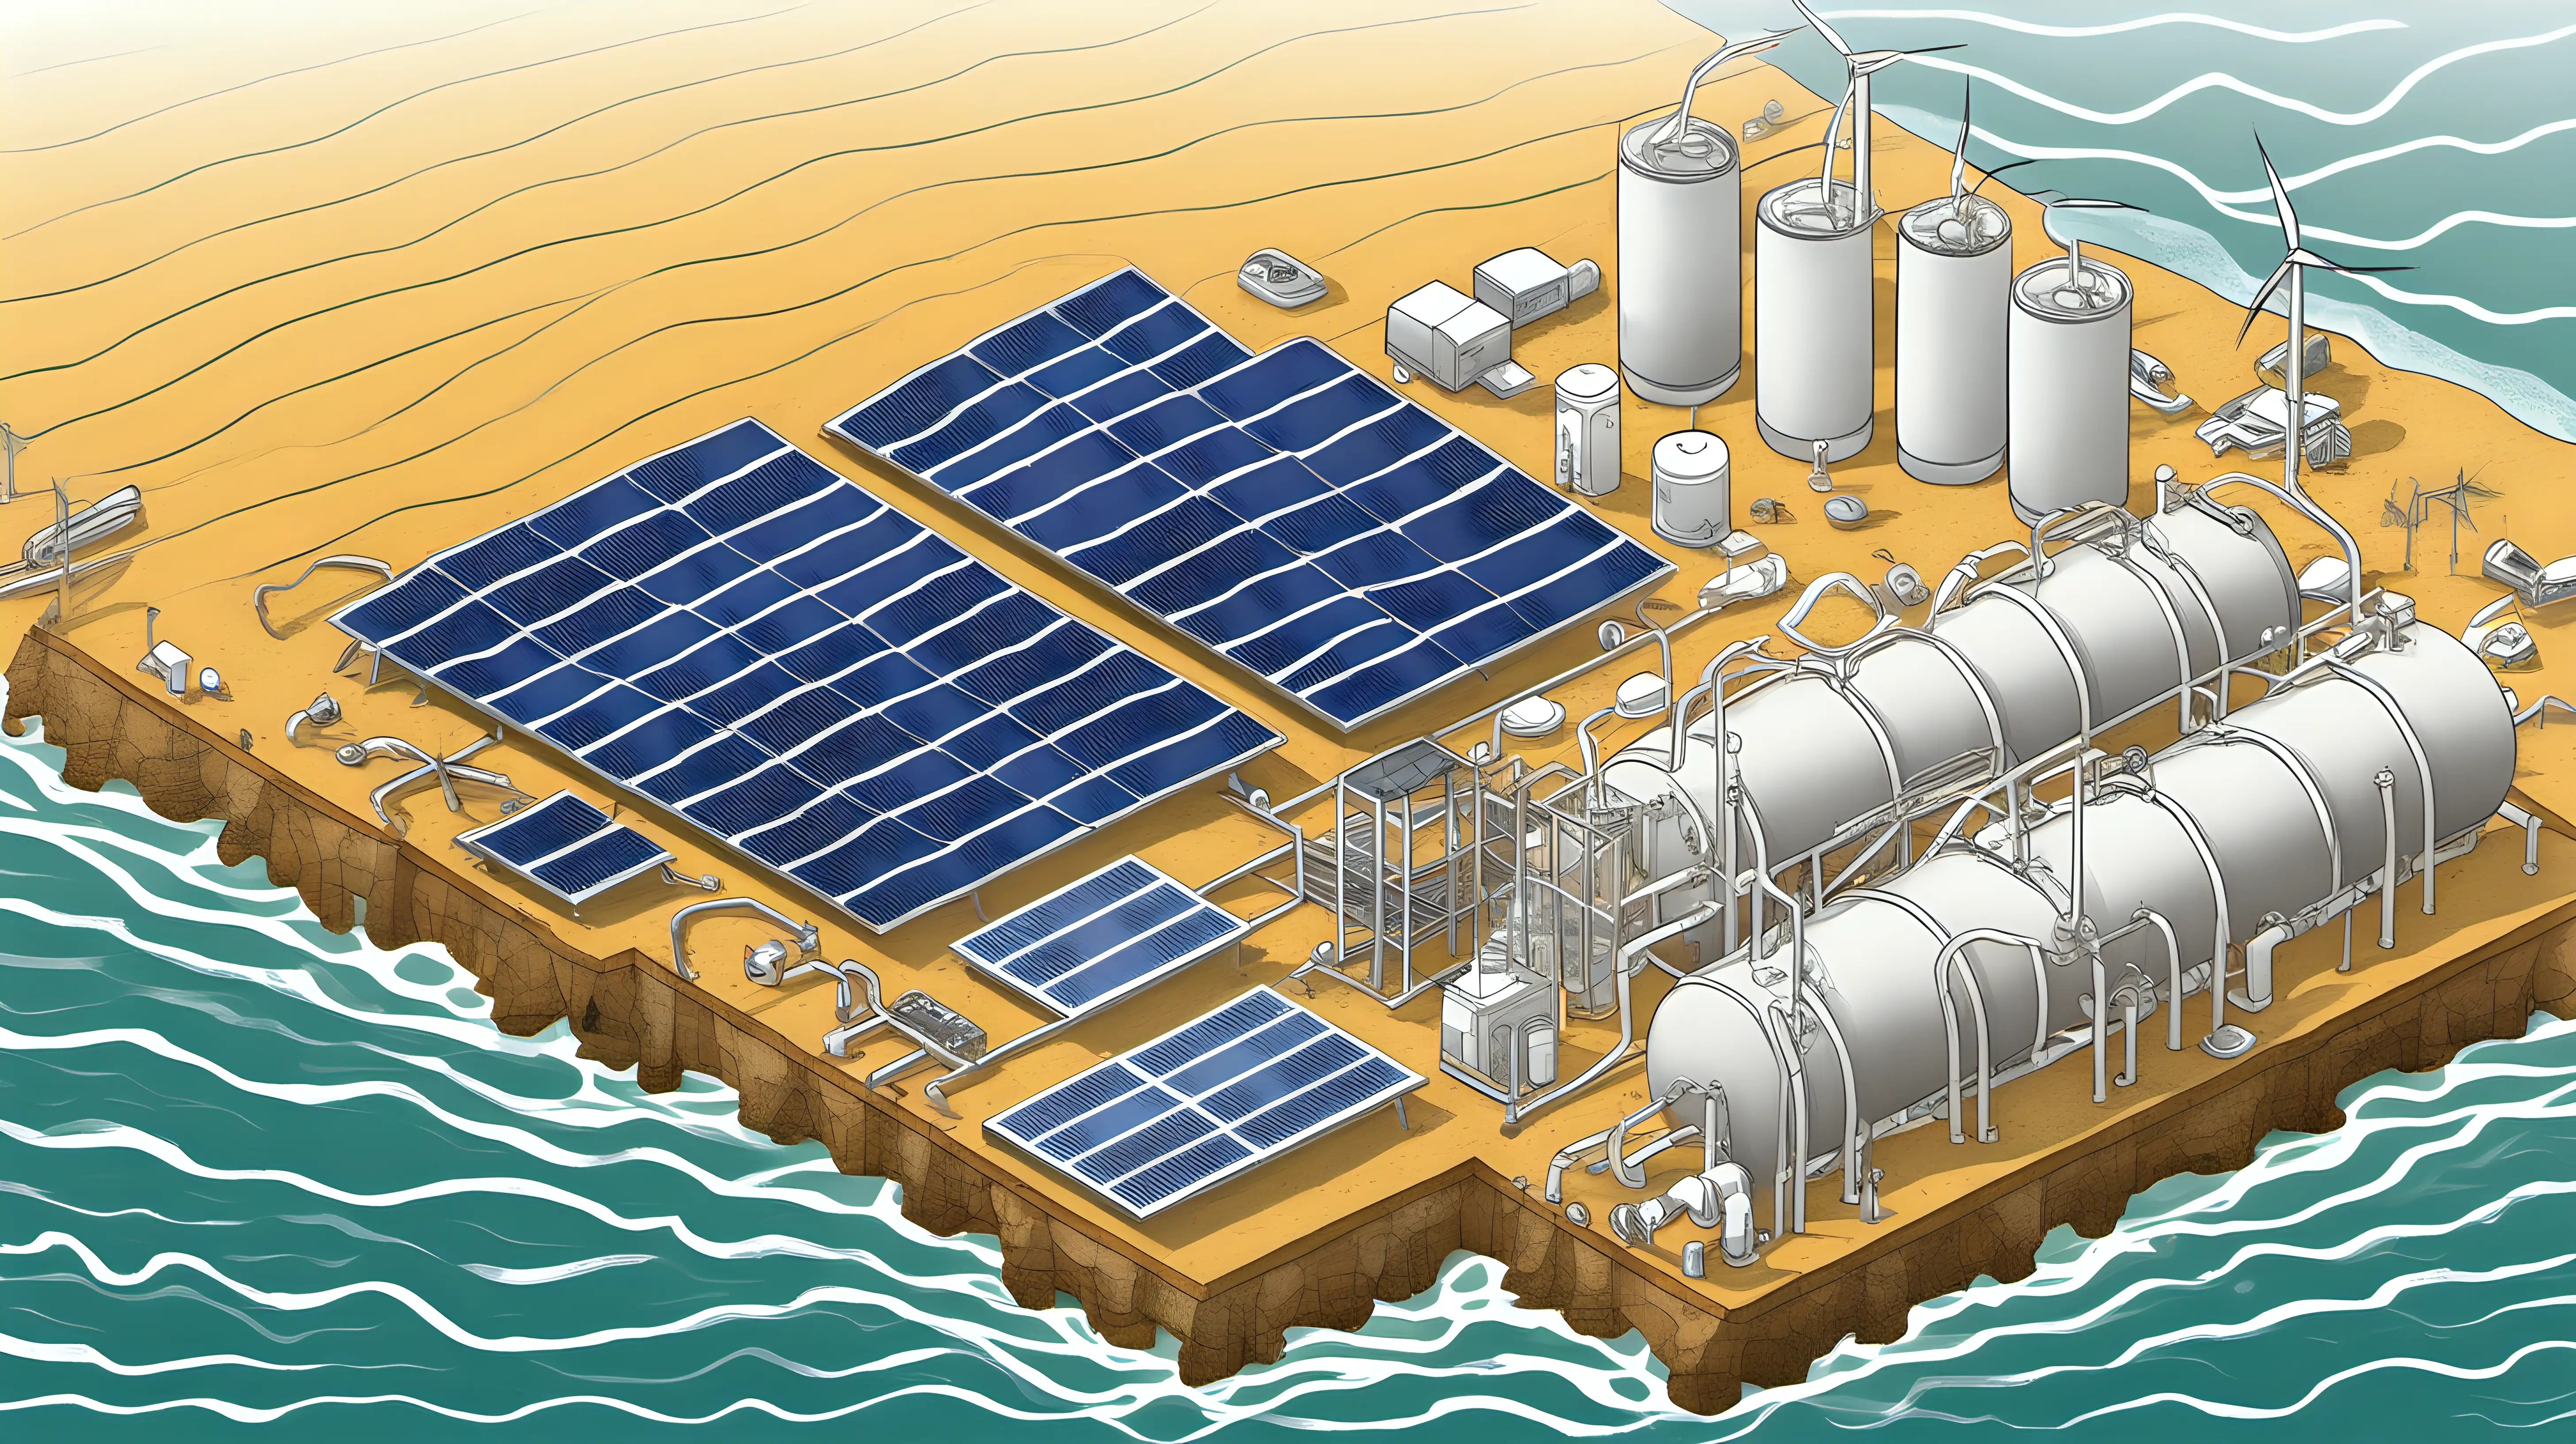 SolarPowered Desalination Plant Tackling Clean Energy and Water Scarcity on the Coastal Front